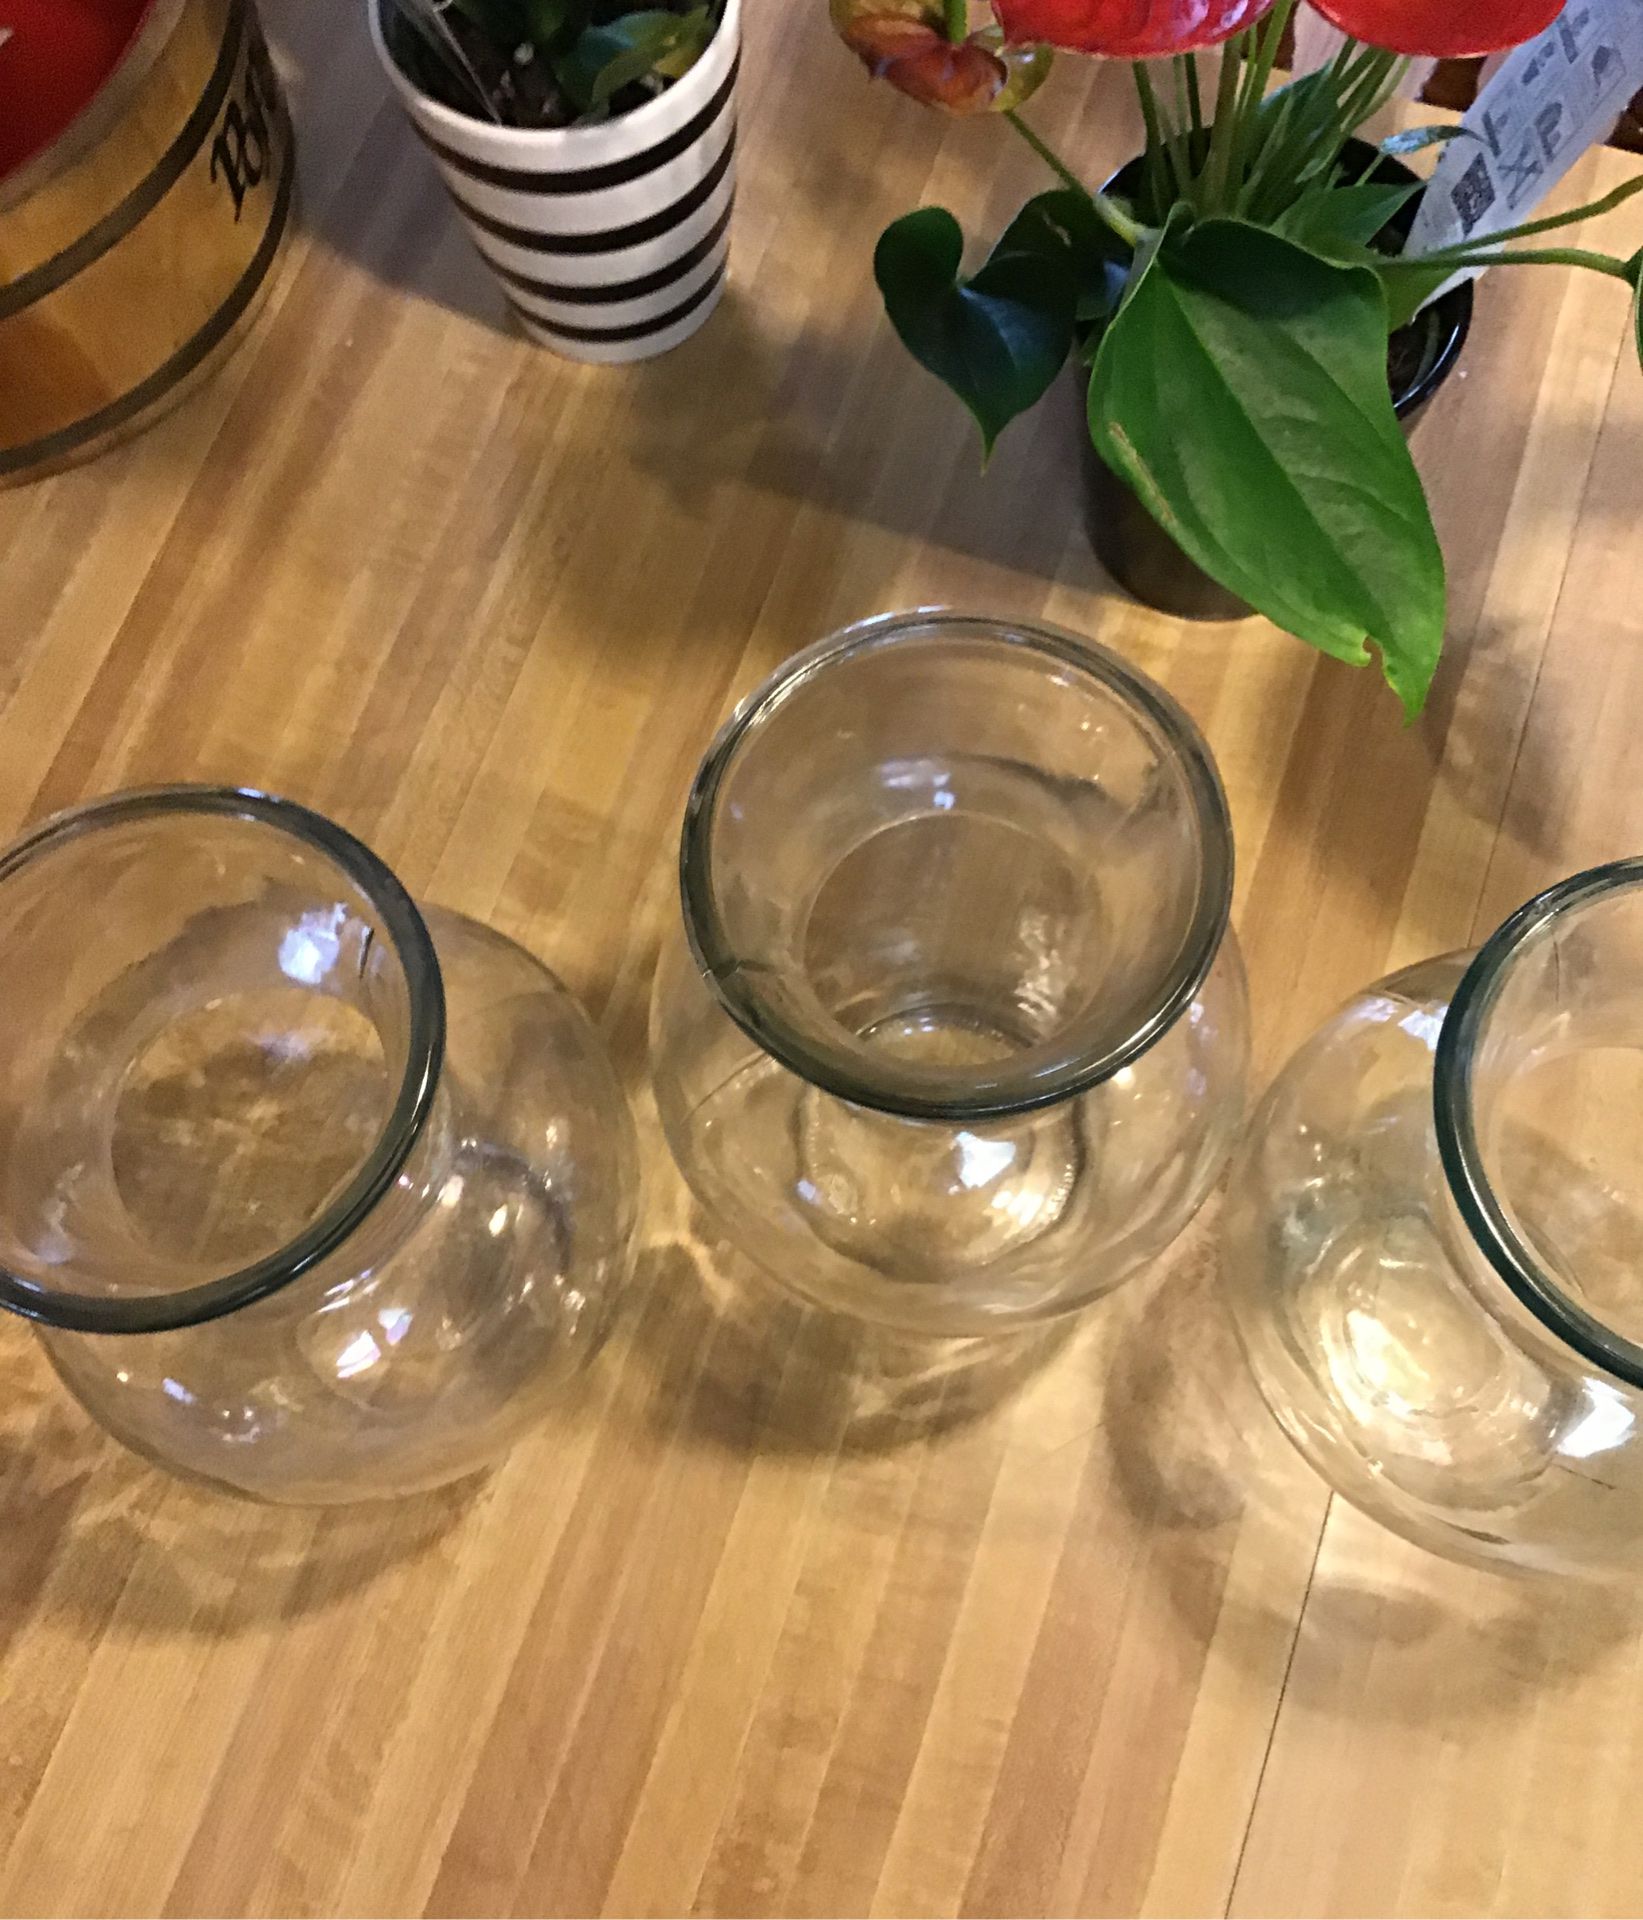 Clear vases stands 11” tall